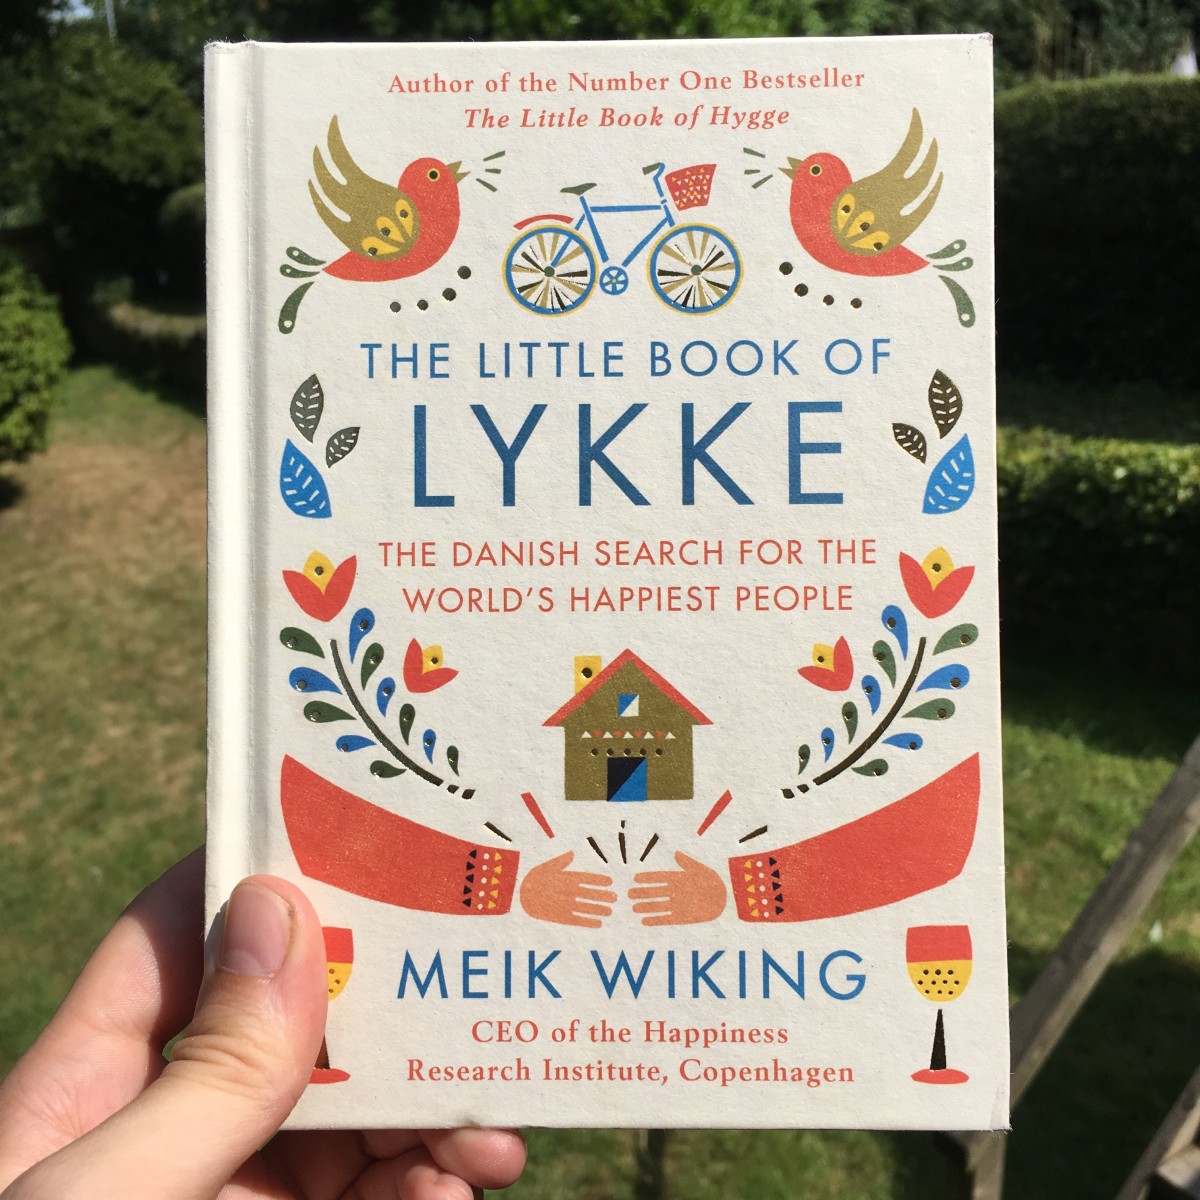 Book Review: “The Little Book of Lykke” by Meik Wiking